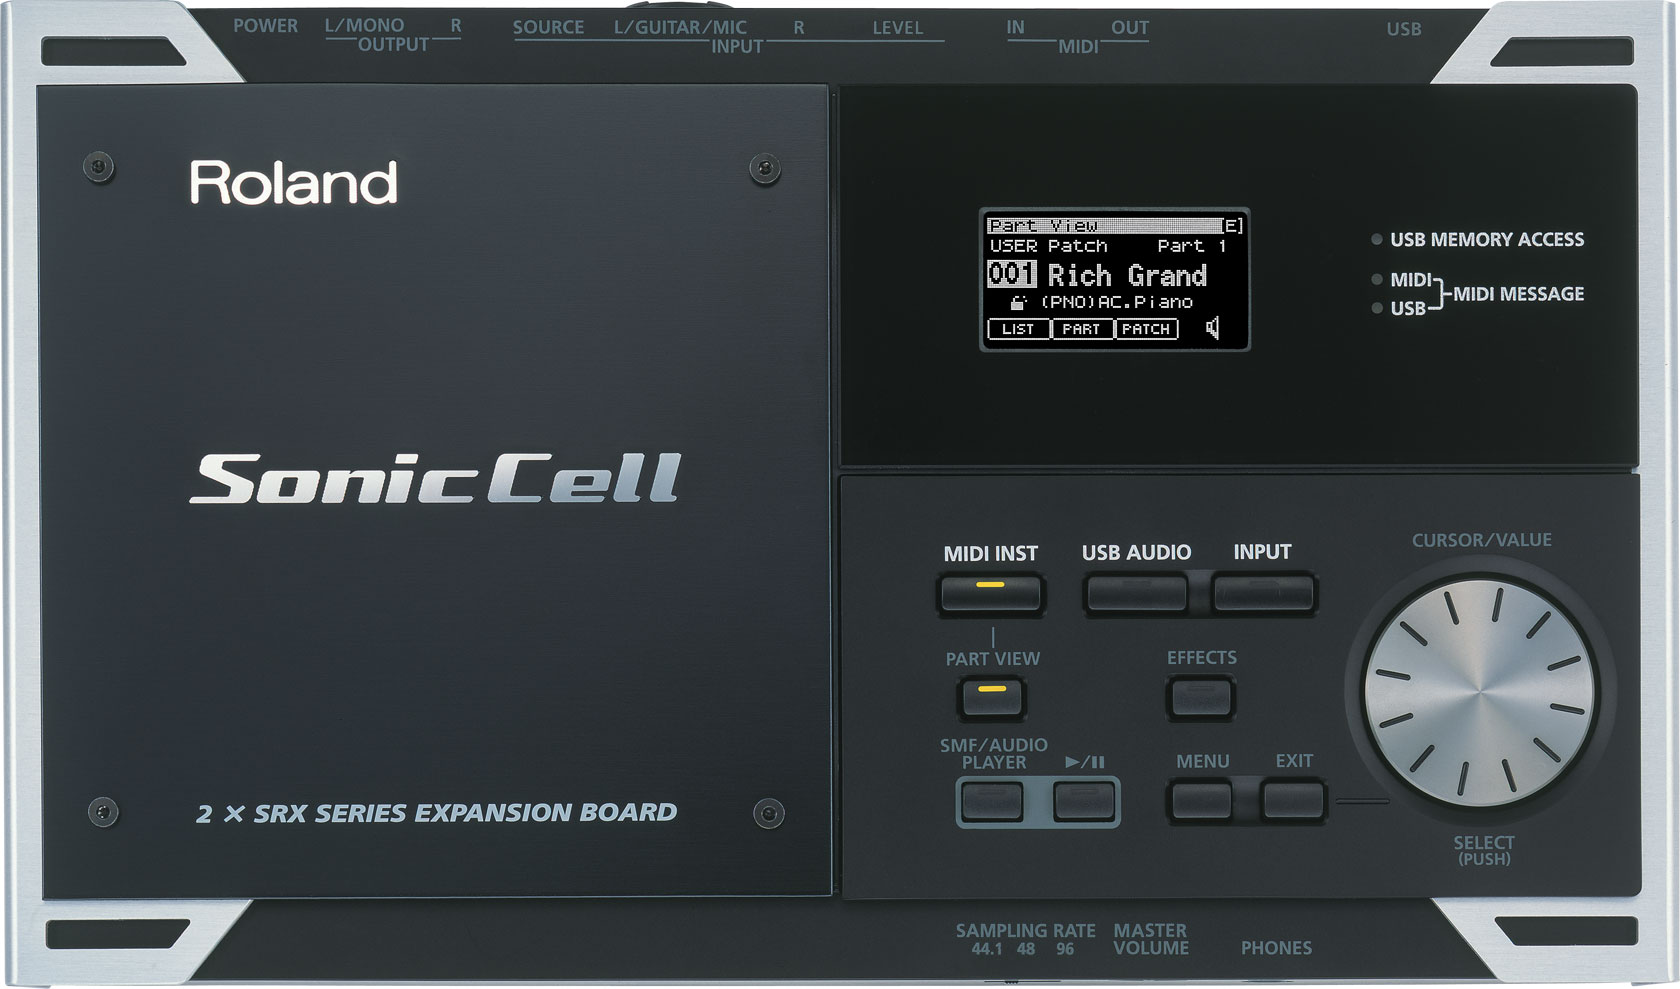 Roland SonicCell | Vintage Synth Explorer